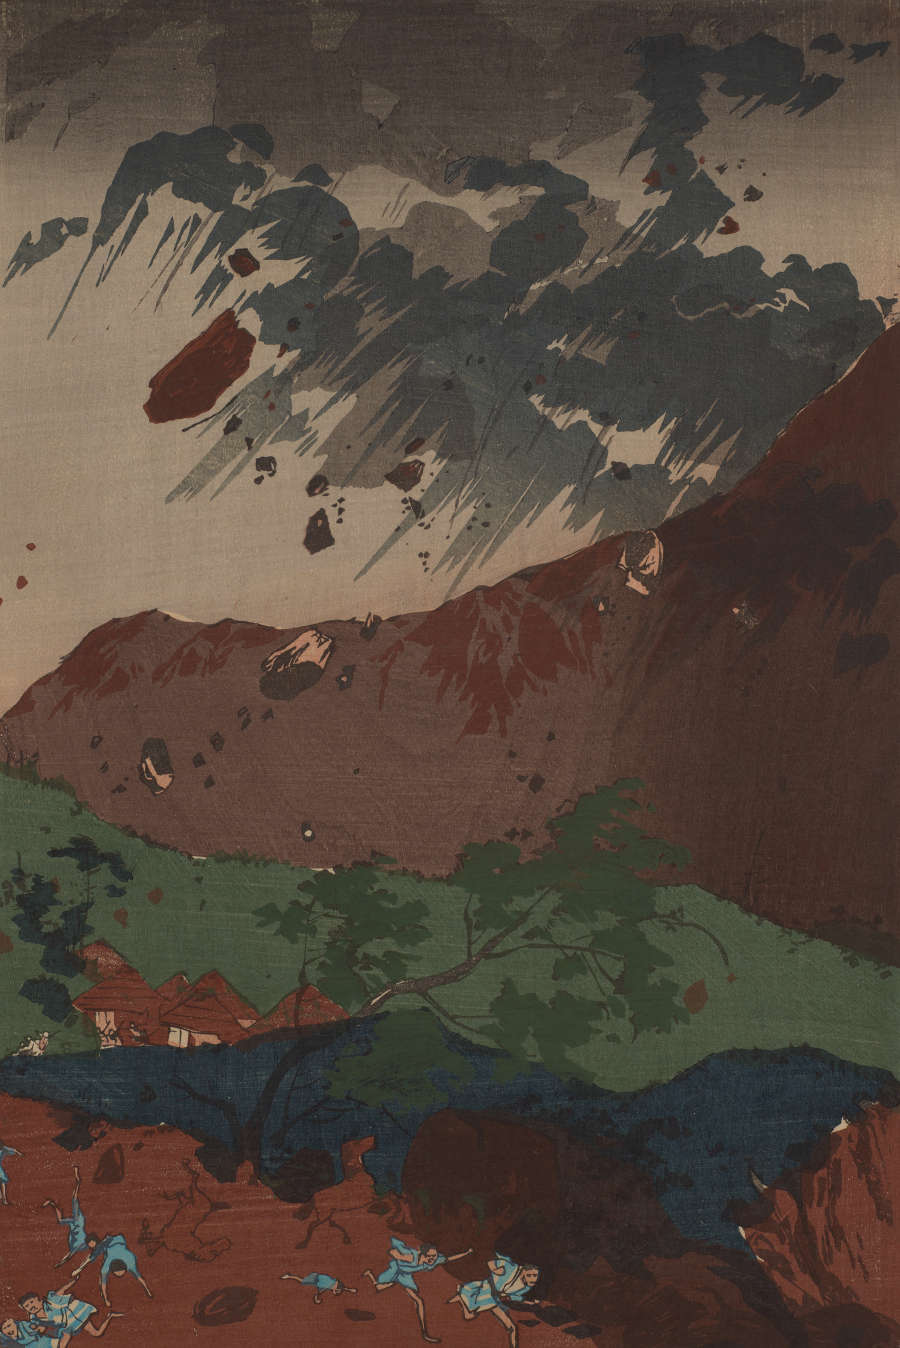 Detail of the center print, showing the half of a brown mountain with green terrain and running people beneath. Above, fast-moving gray clouds and debris fly against a tan background.